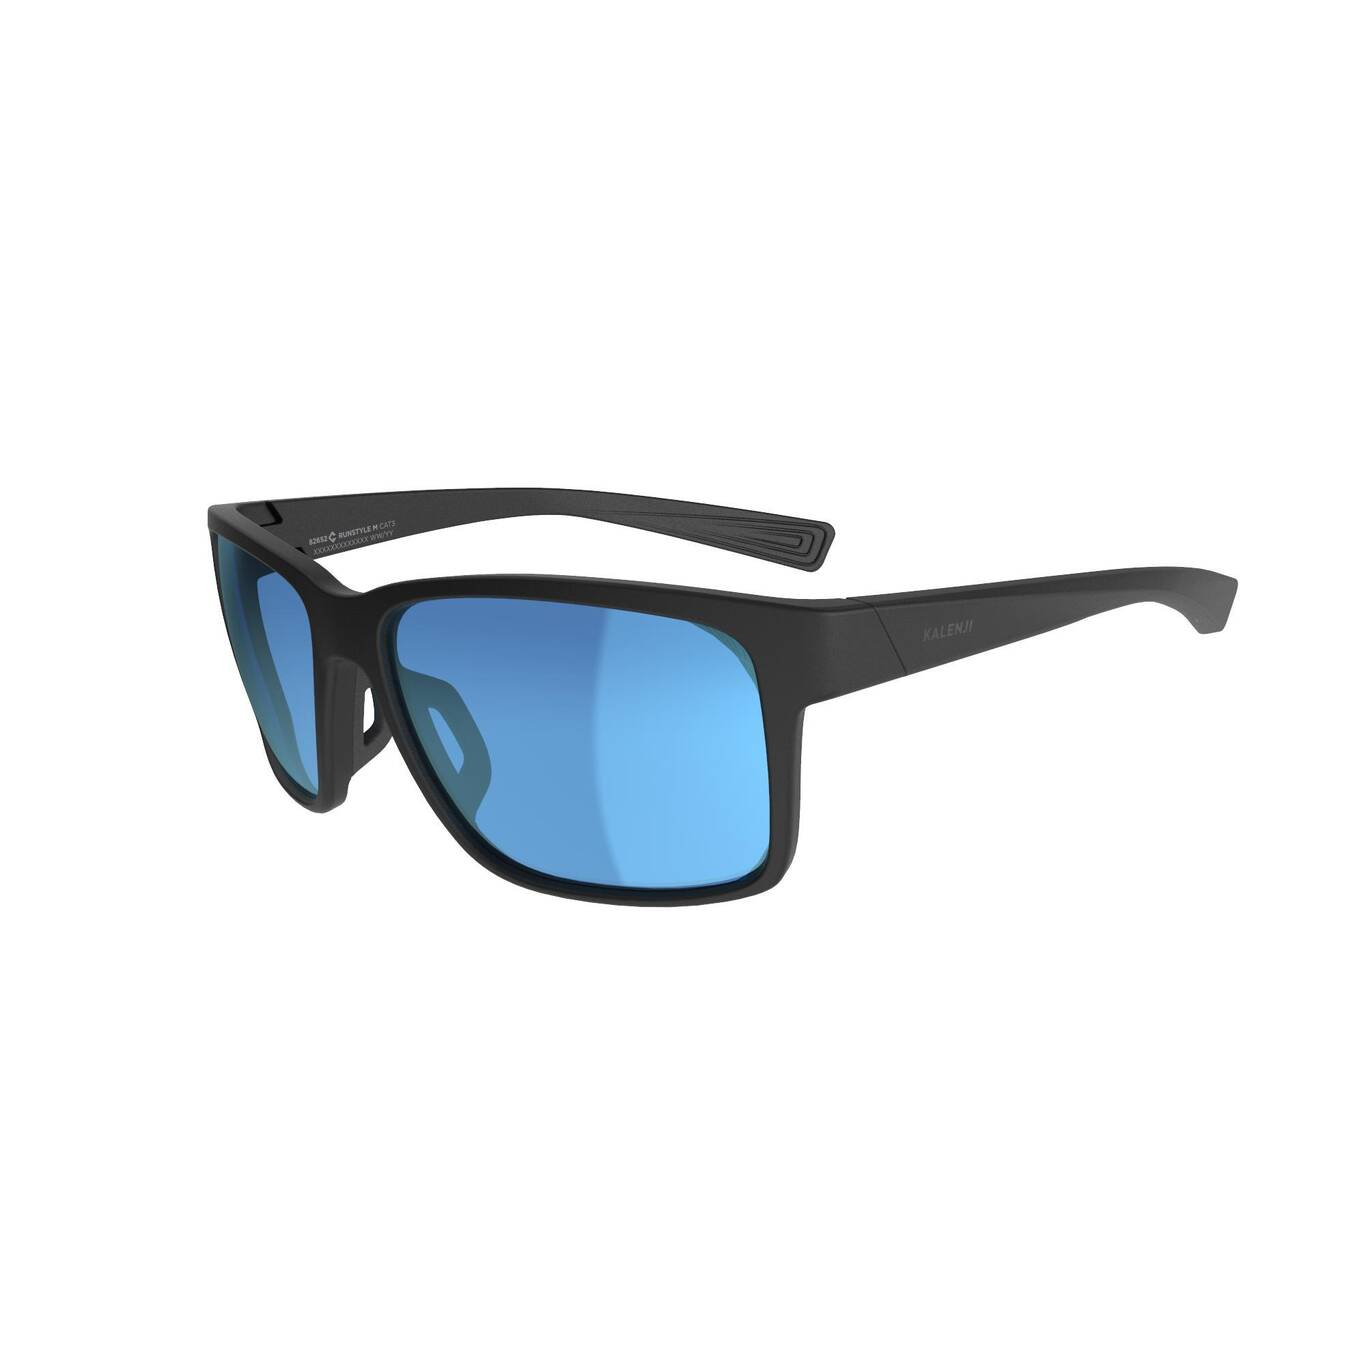 https://contents.mediadecathlon.com/p1926094/k$5eaa3b082d4482acfcd953444bac42f3/runstyle-2-adult-running-glasses-category-3-asia-blue.jpg?format=auto&quality=70&f=1366x1366